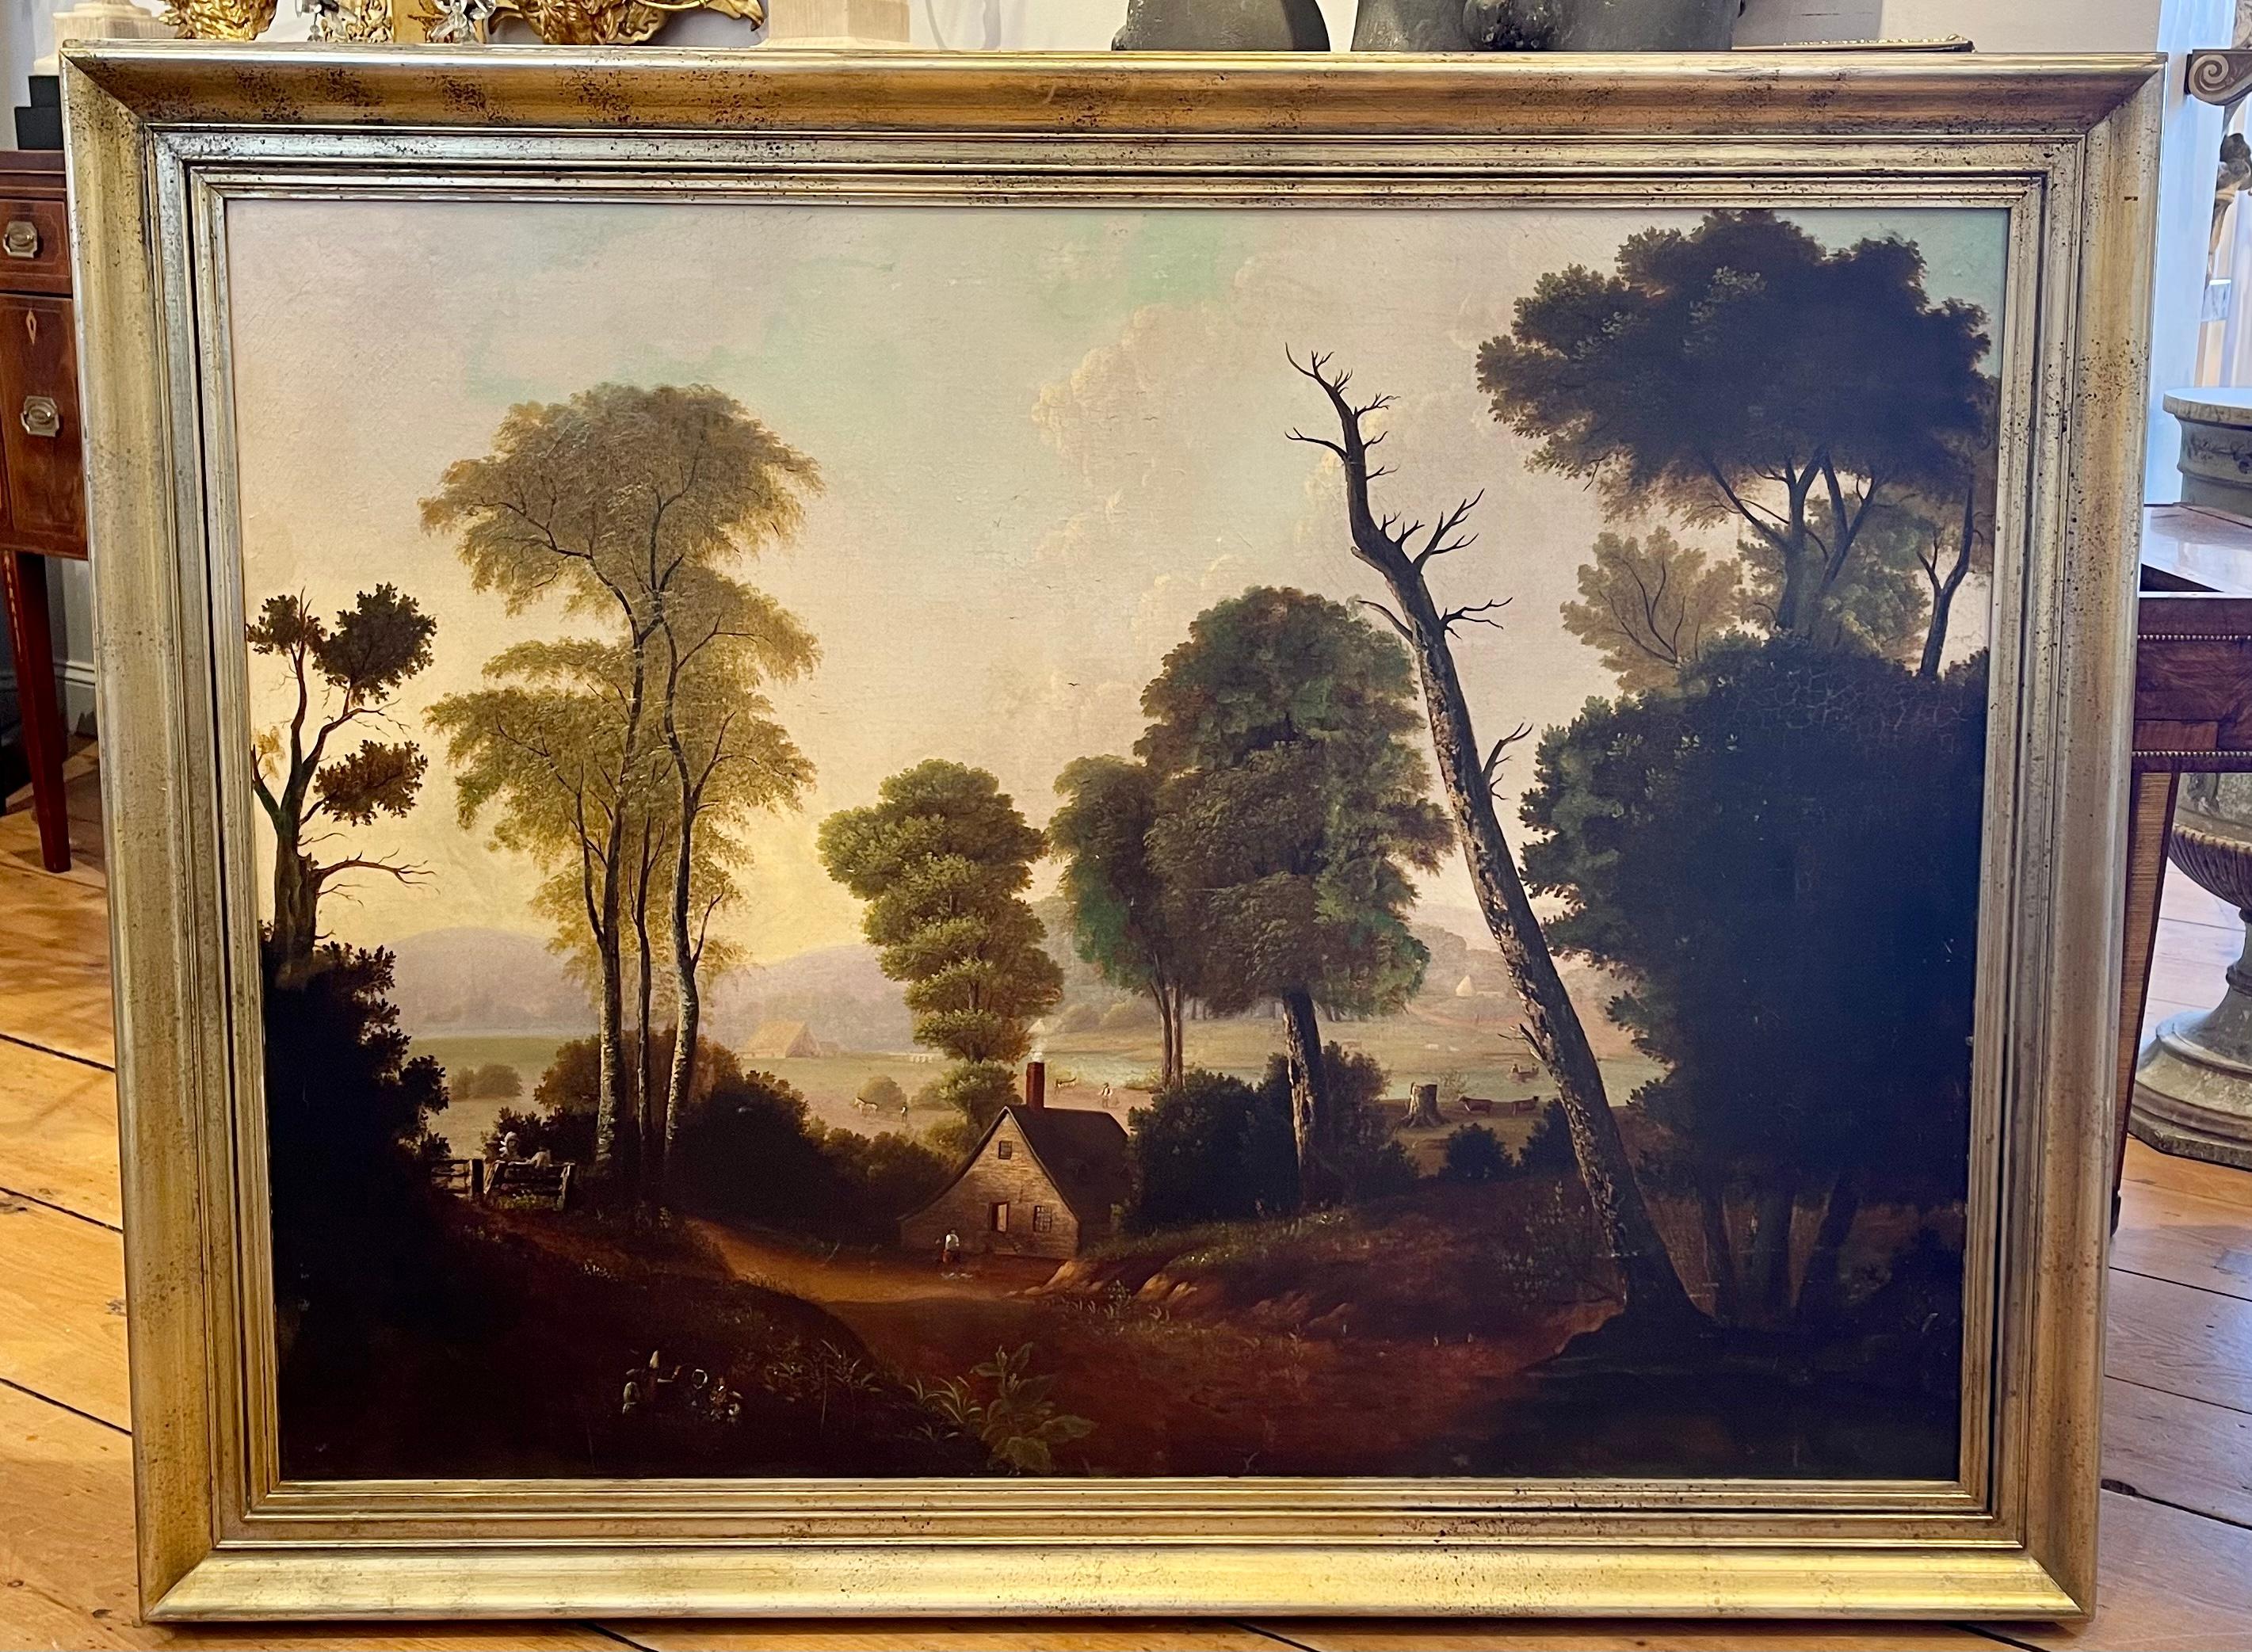 Hand-Painted 19th Century American Landscape Painting in Style of George Caleb Bingham For Sale